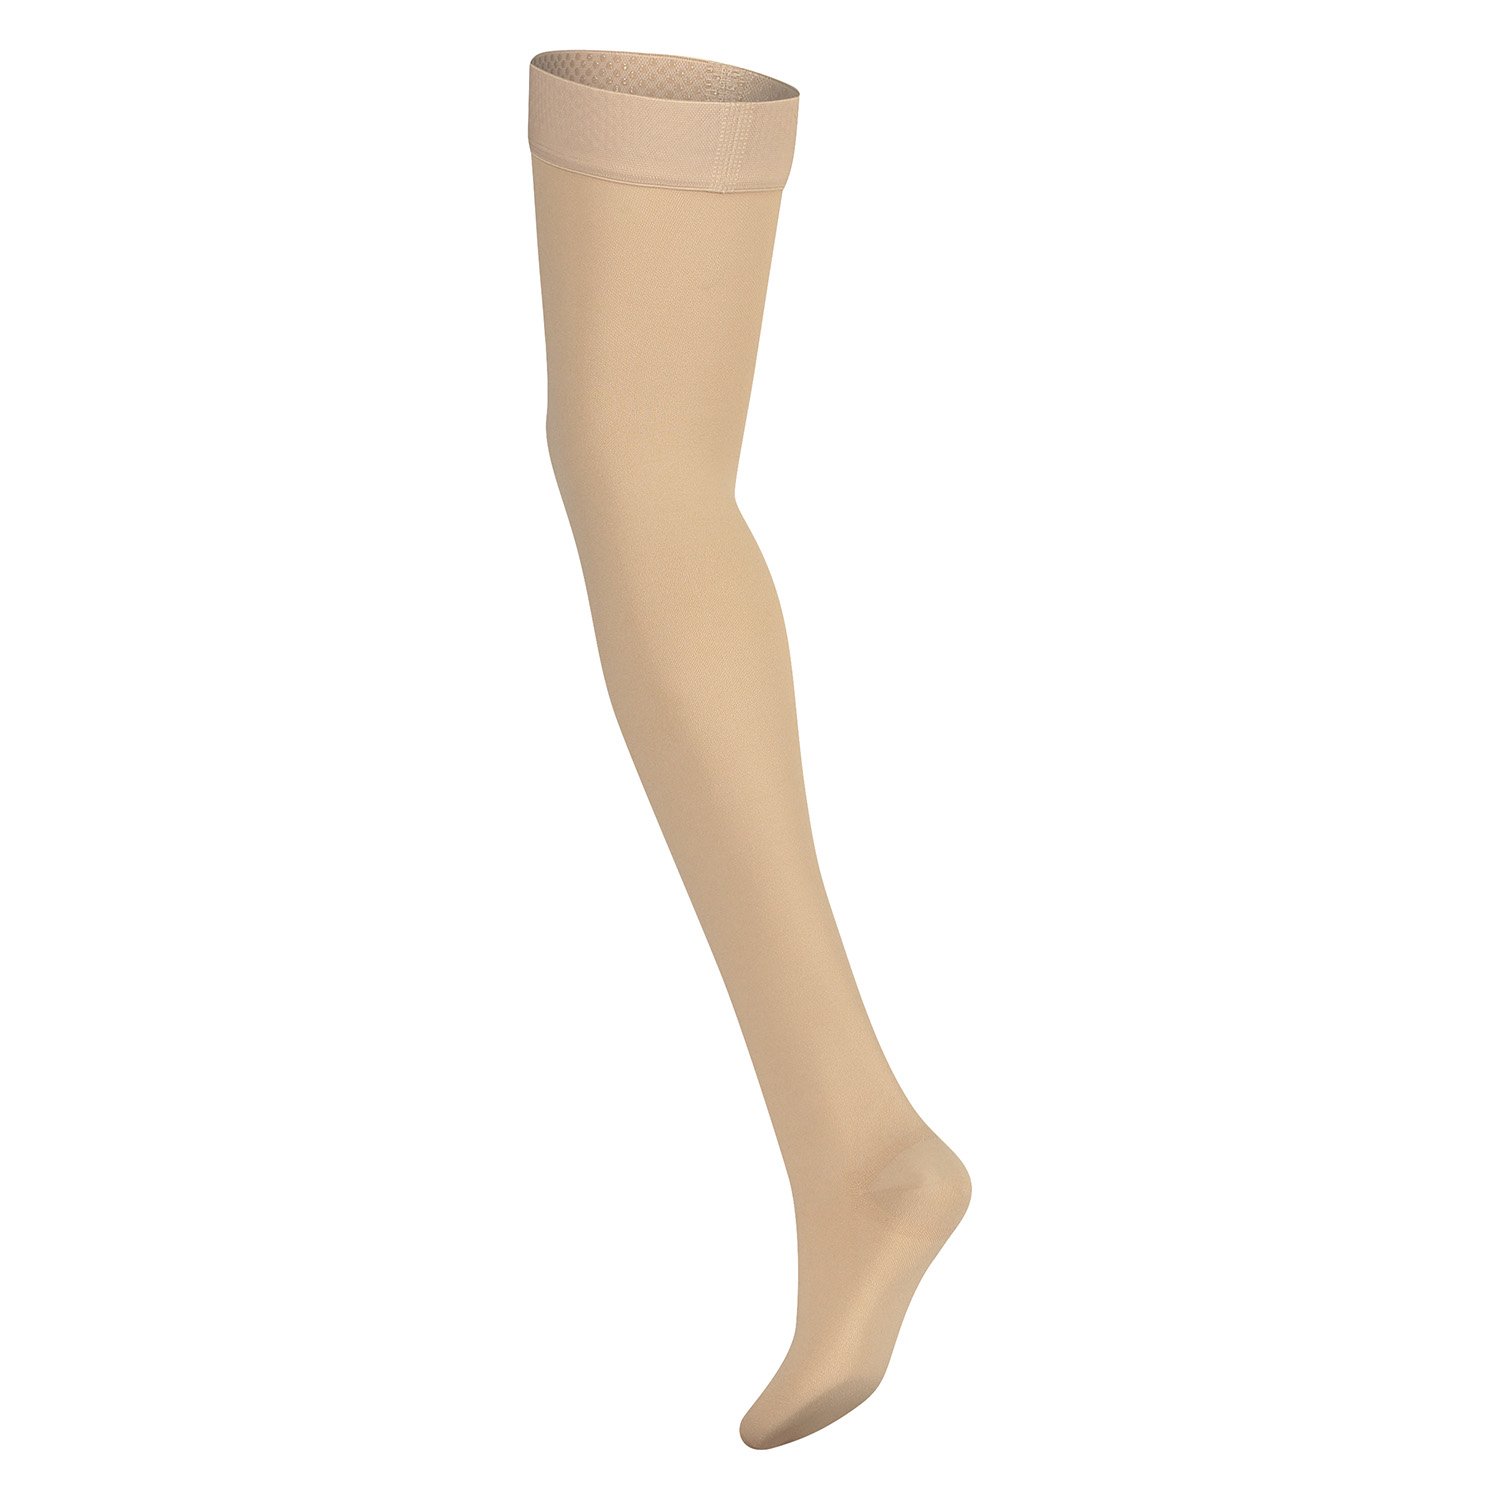 dunimed premium comfort compression stockings groin length closed toe side view